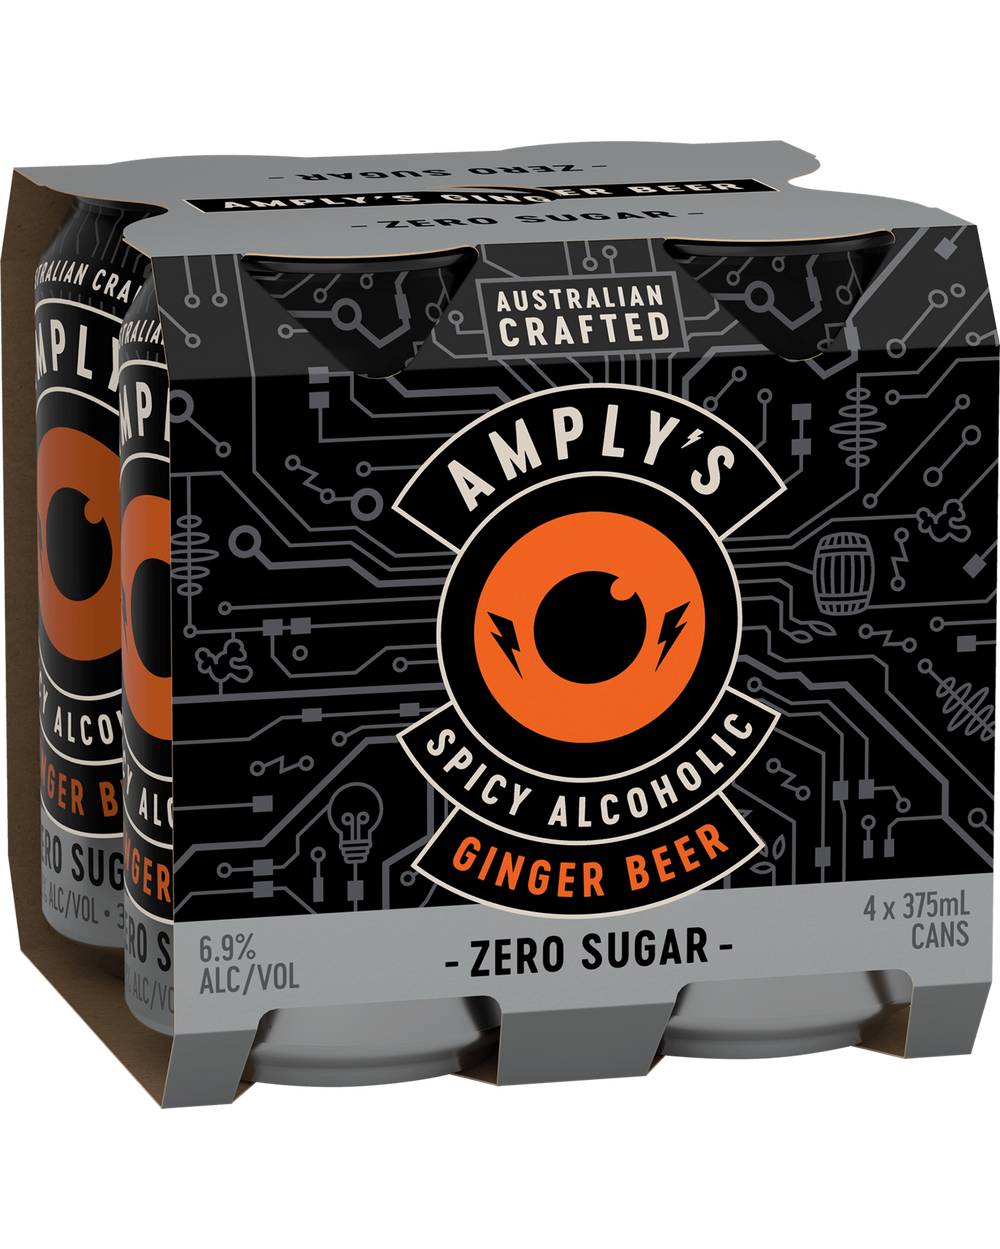 Amplys Ginger Beer Zer Can (4 Pack, 375mL)